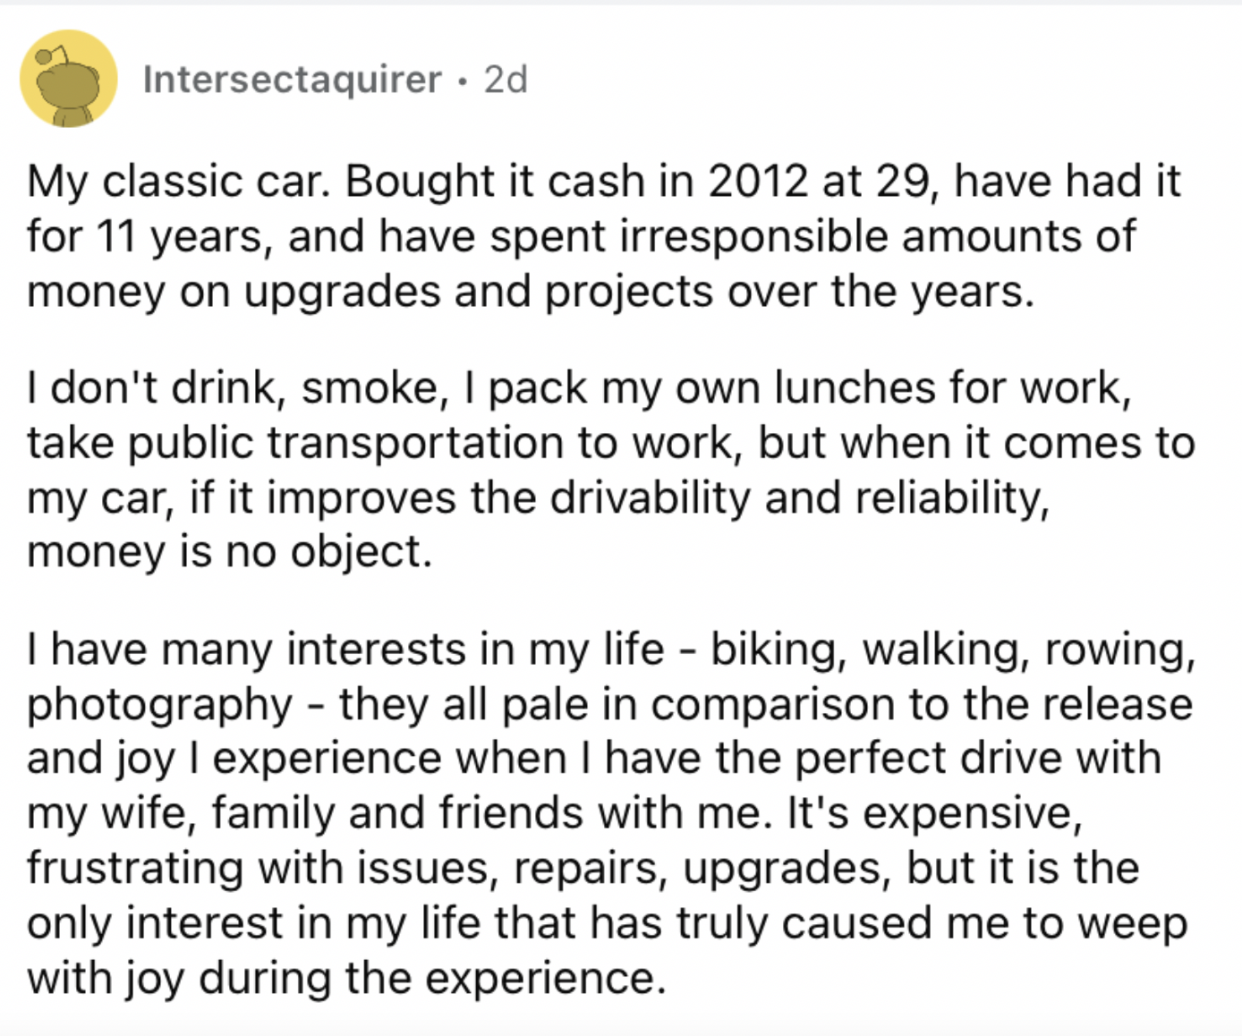 Reddit screenshot of someone talking about their classic car.